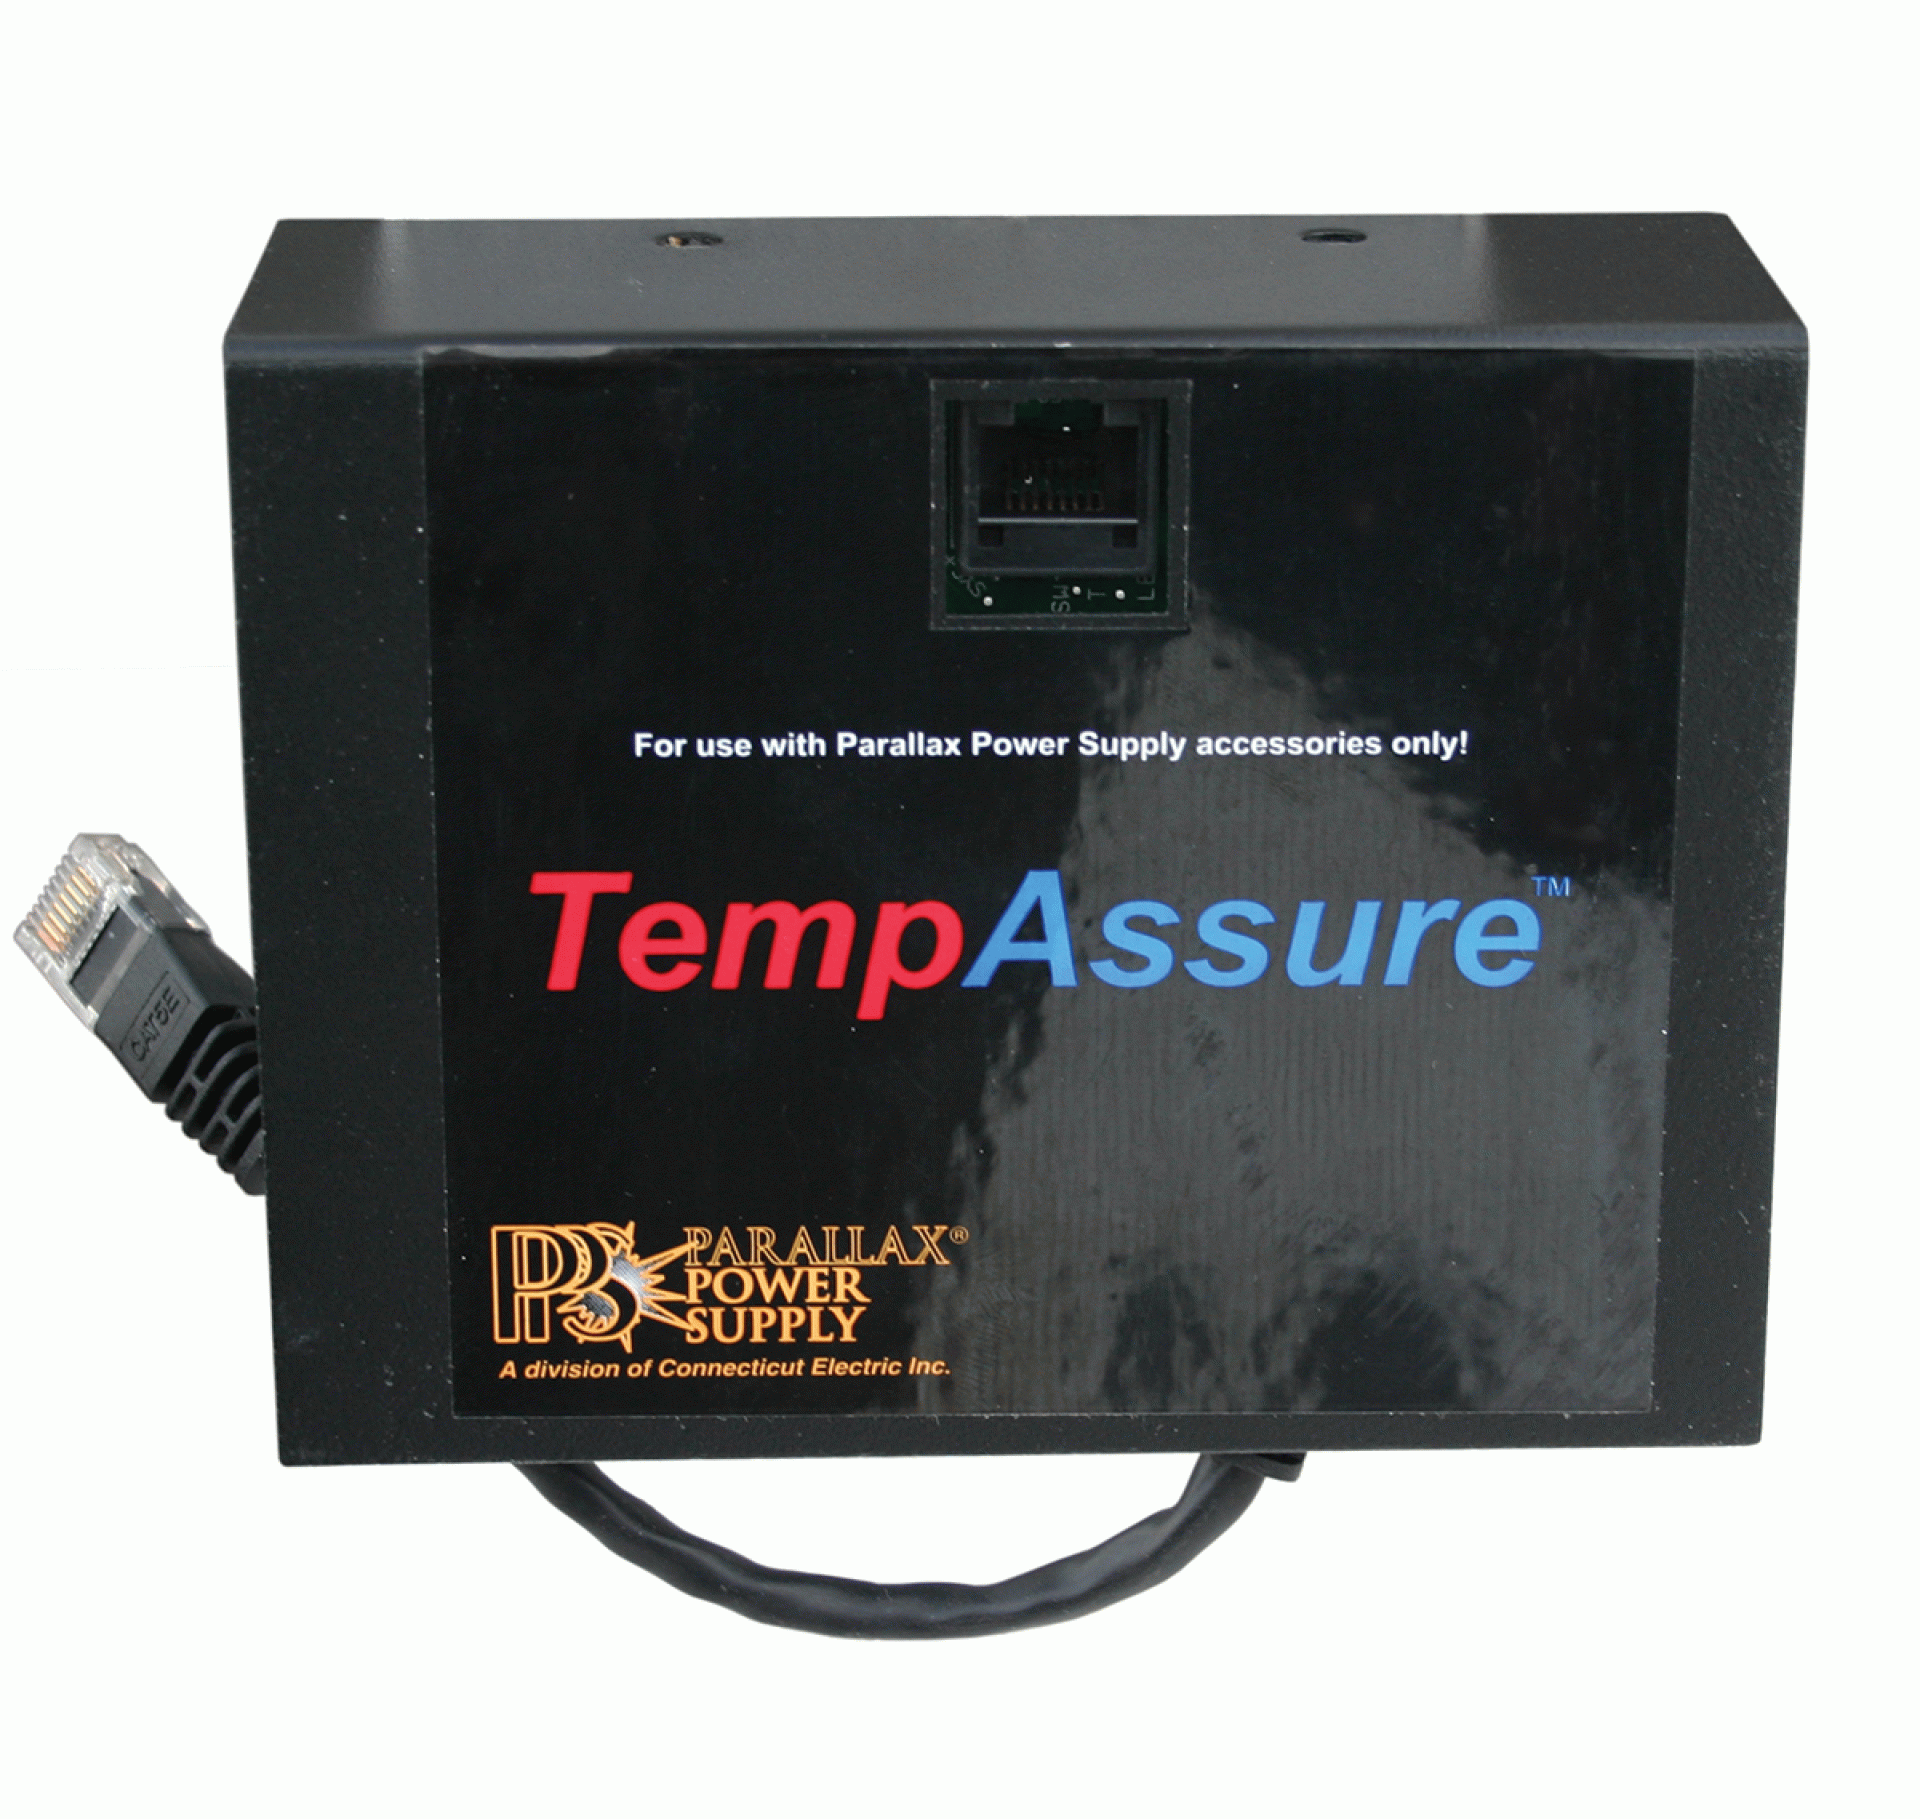 PARALLAX POWER SUPPLY | 4400TAU | TEMP ASSURE UPGRADE UNIT FOR 4400 & 5400 CONVERTERS